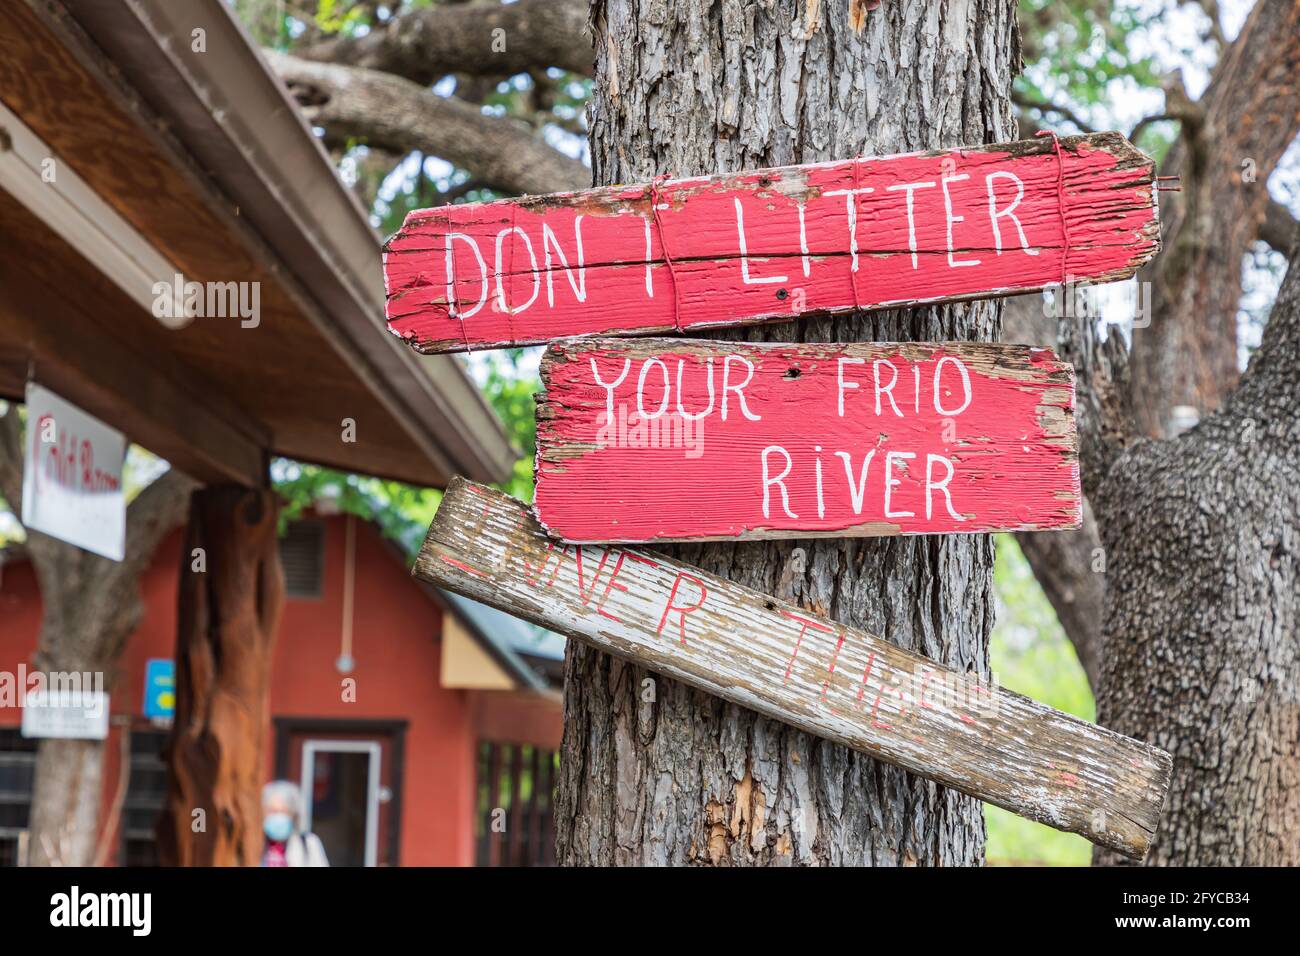 Concan, Texas, USA. April 13, 2021. A don't litter sign in the Texas hill country. Stock Photo